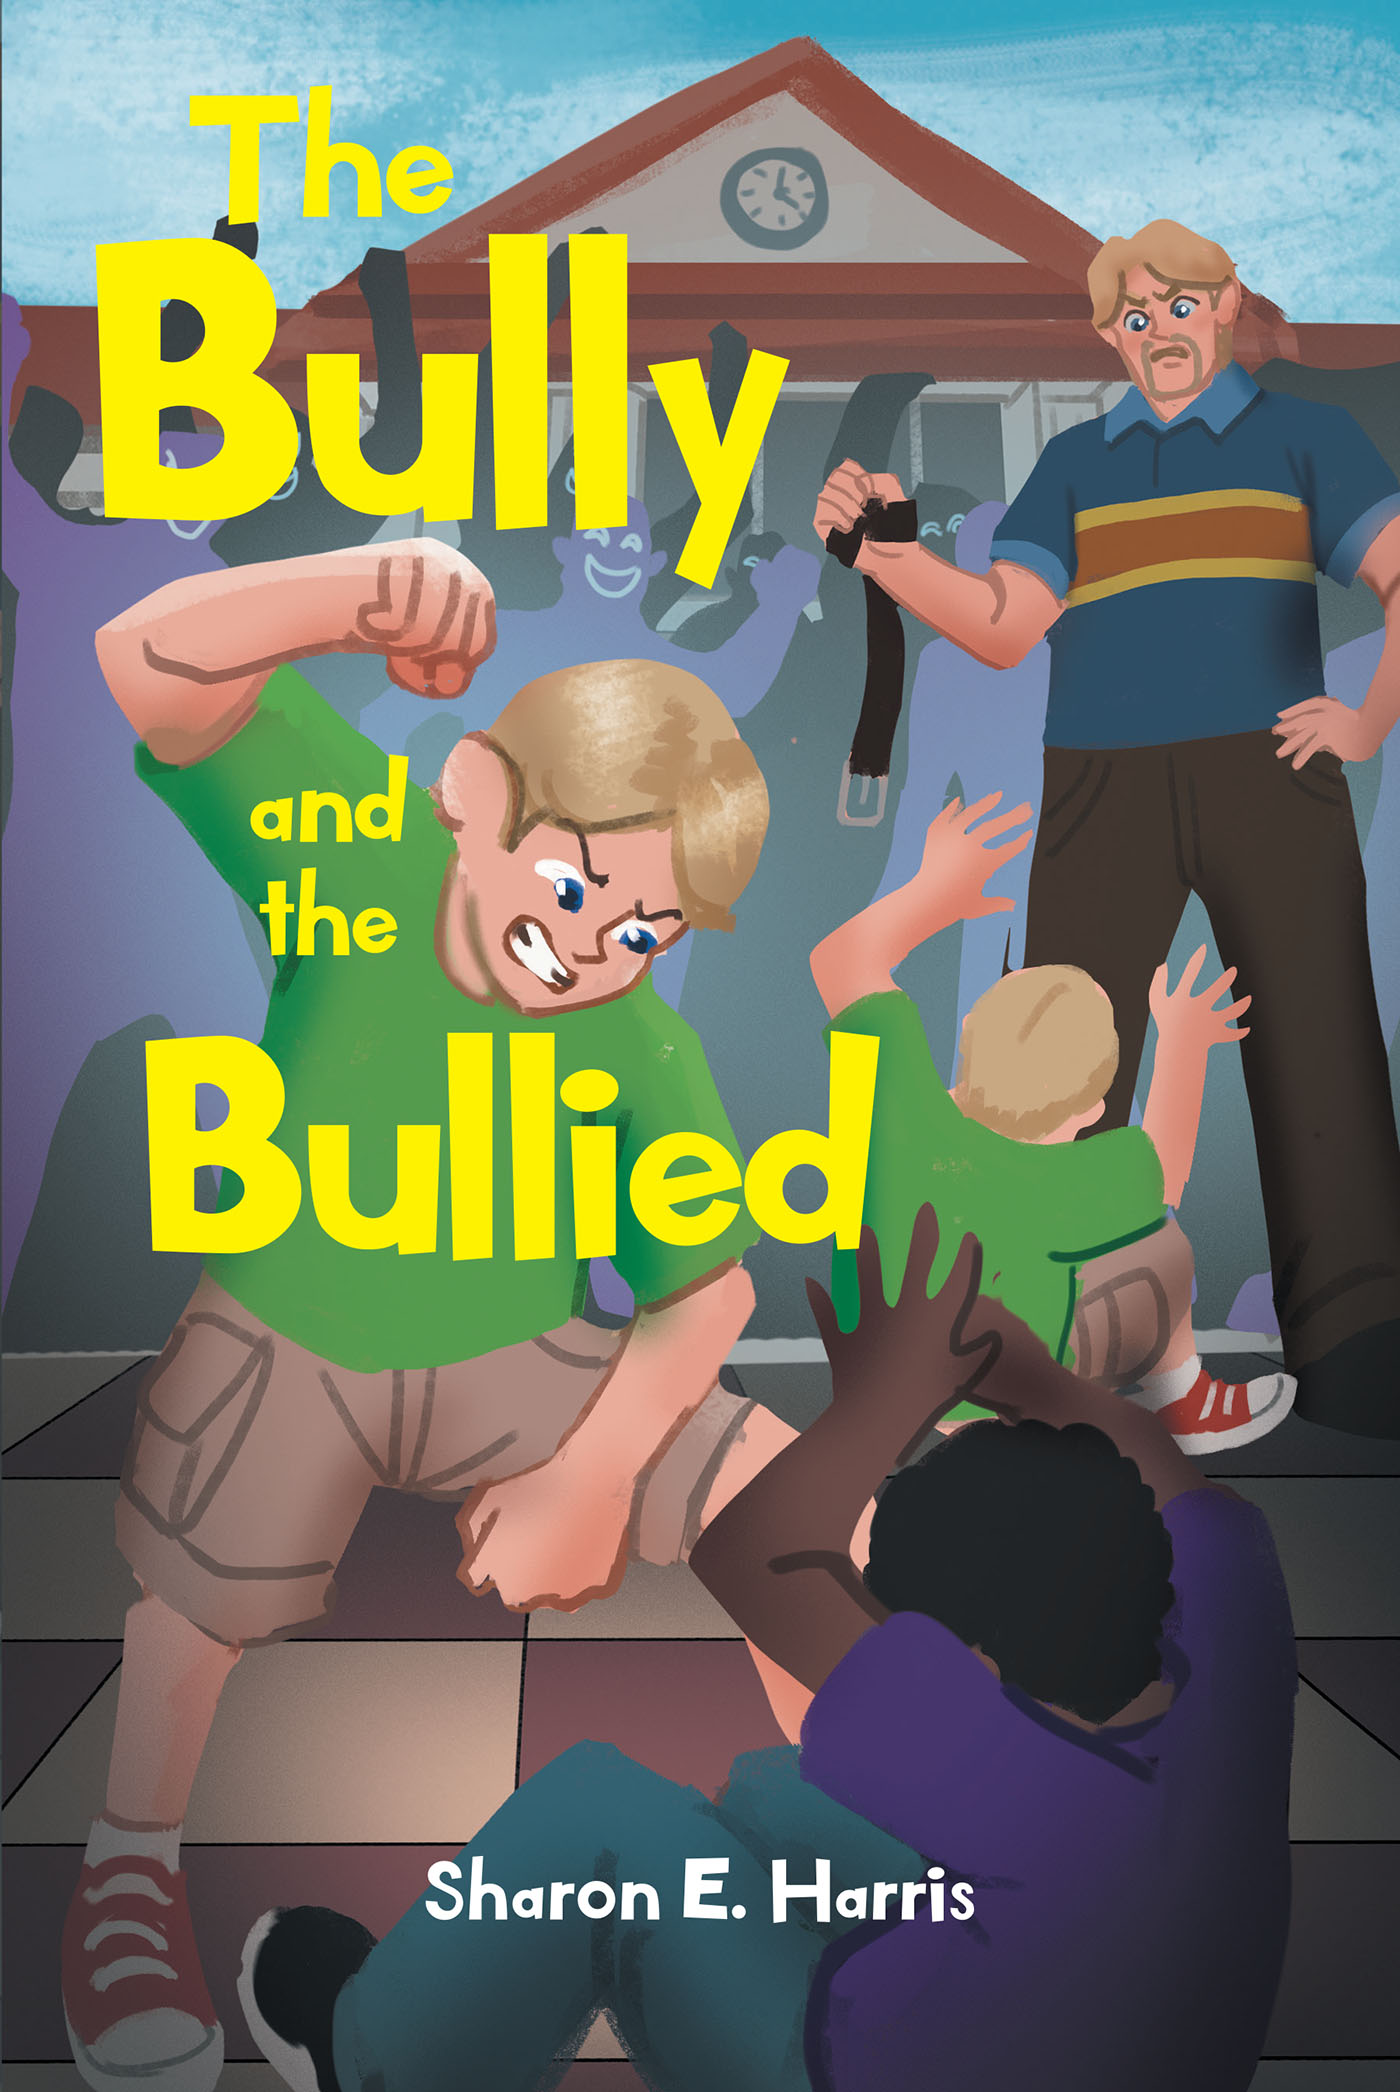 The Long-Lasting Effects of Bullying